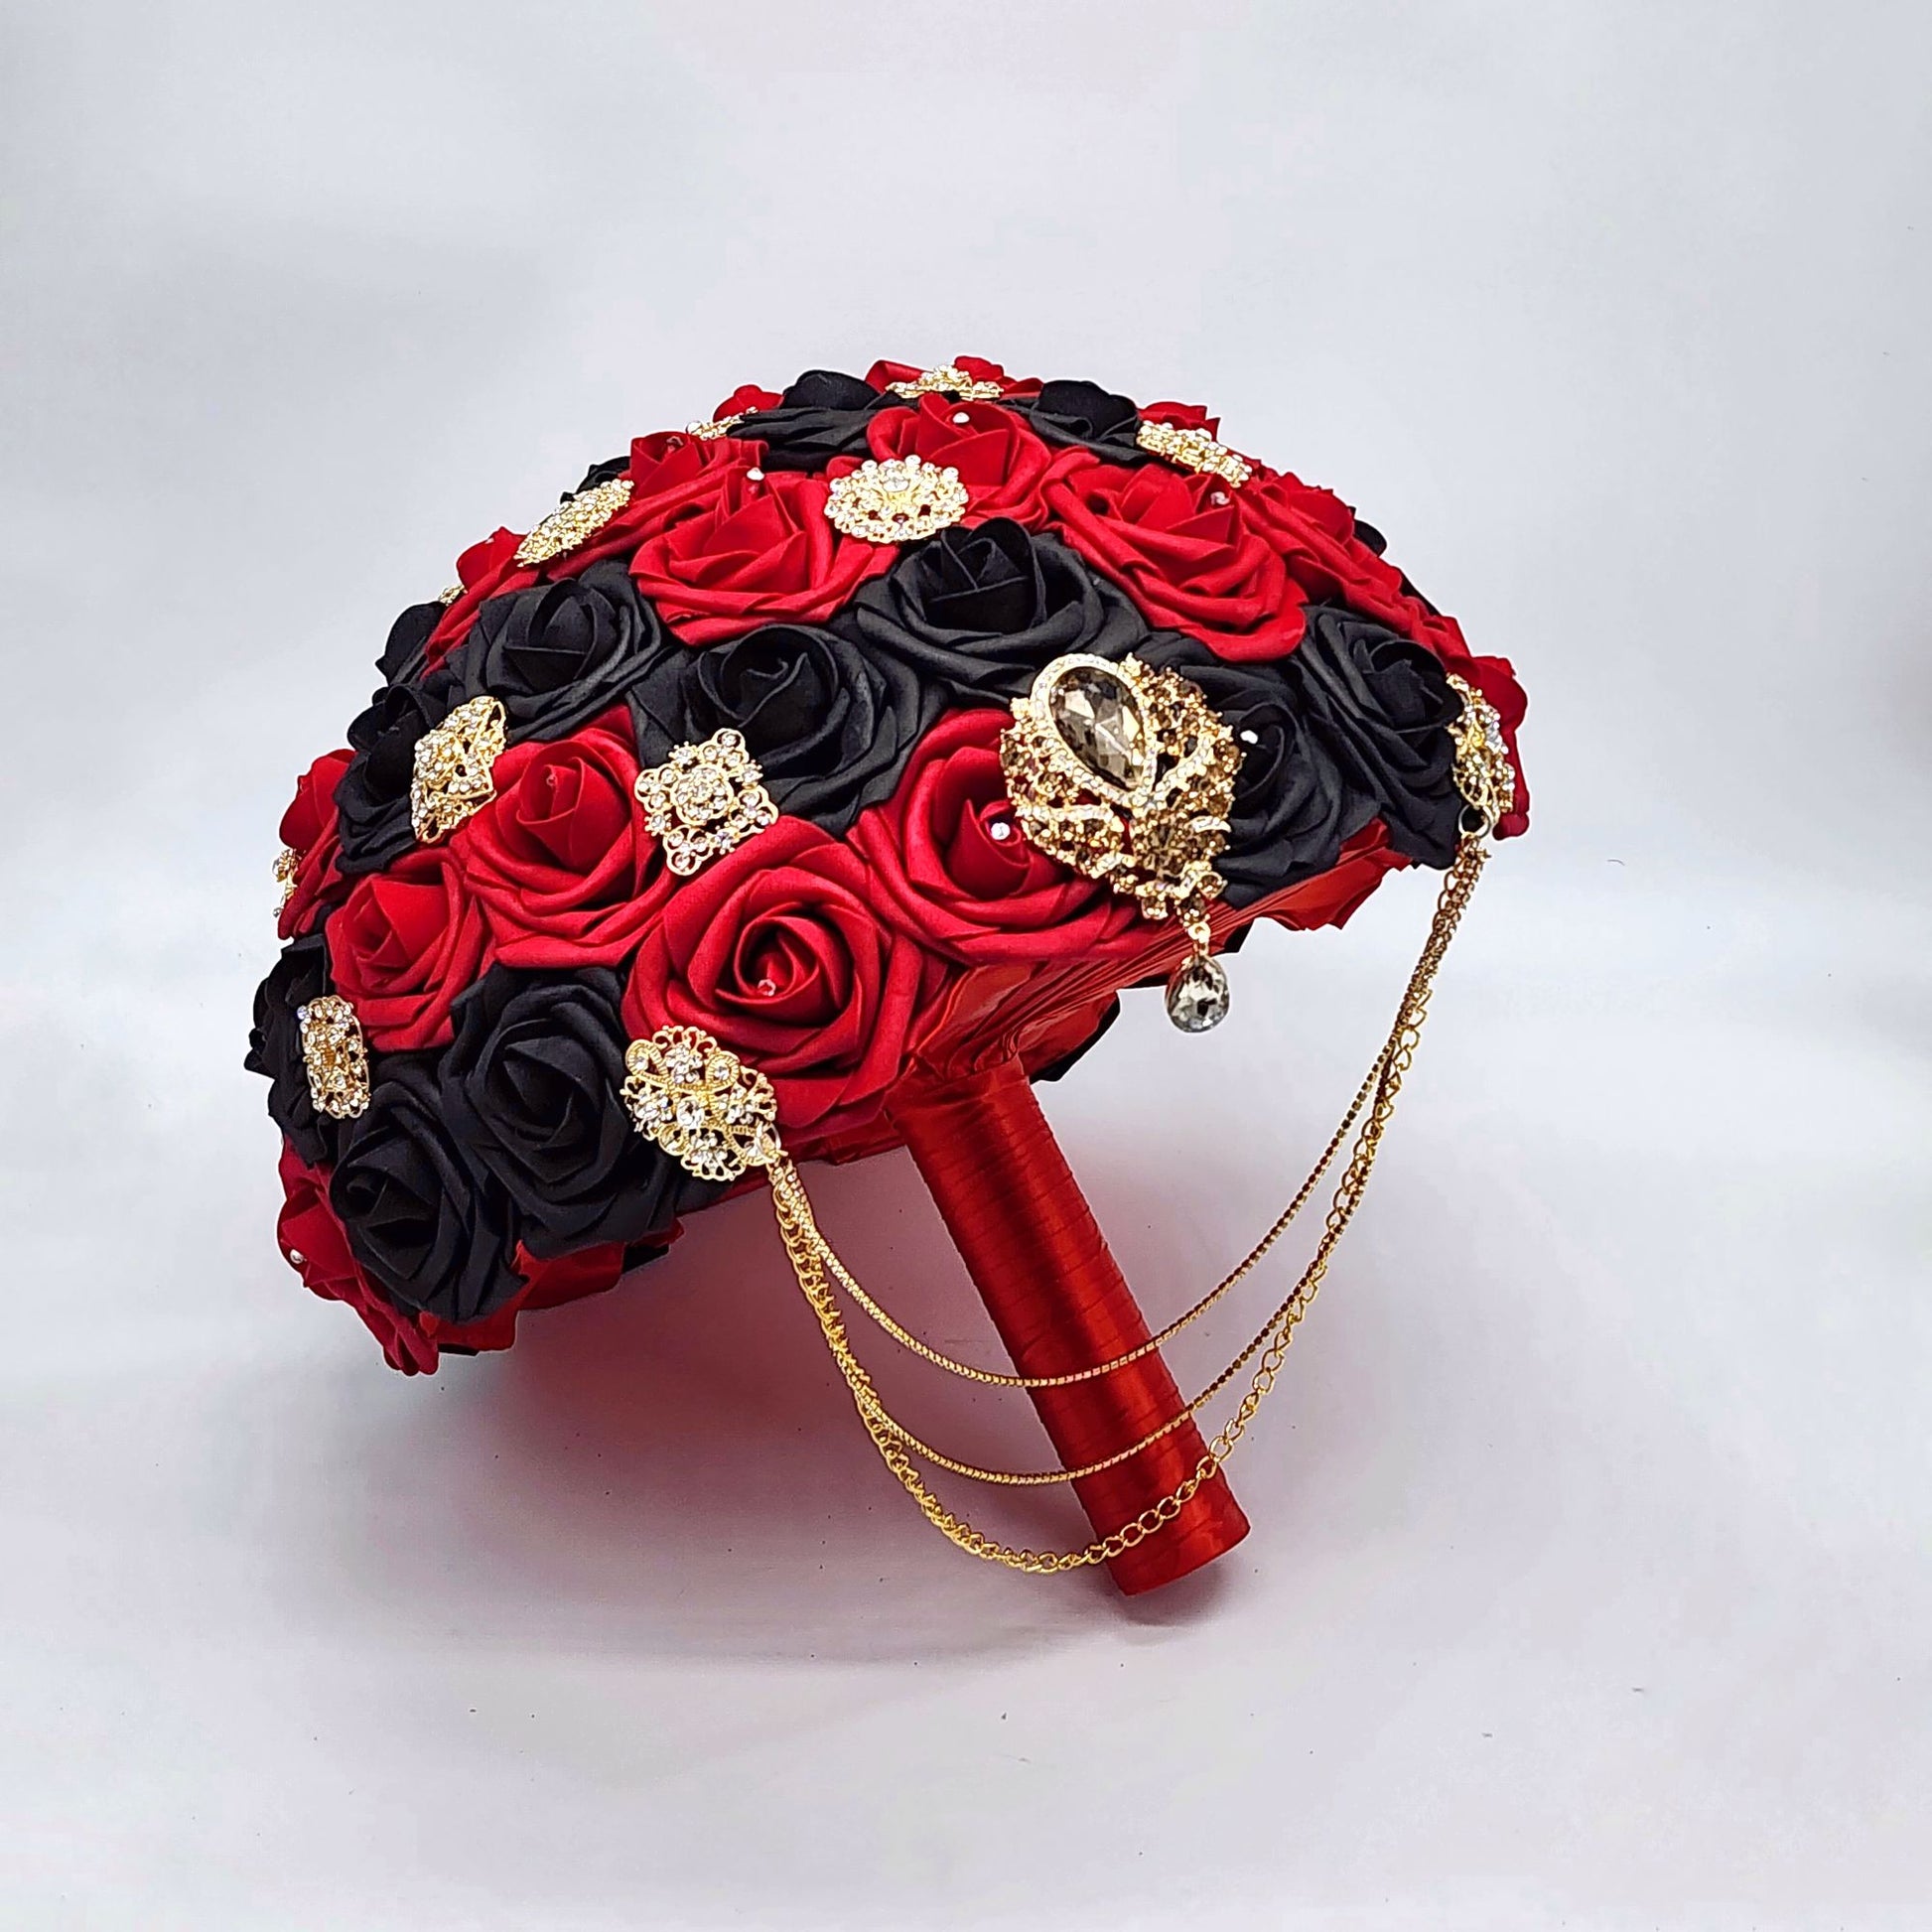 red and black bridal bouquet with cascading gold chains.  made with real touch roses. Handle is made up of satin red ribbon.